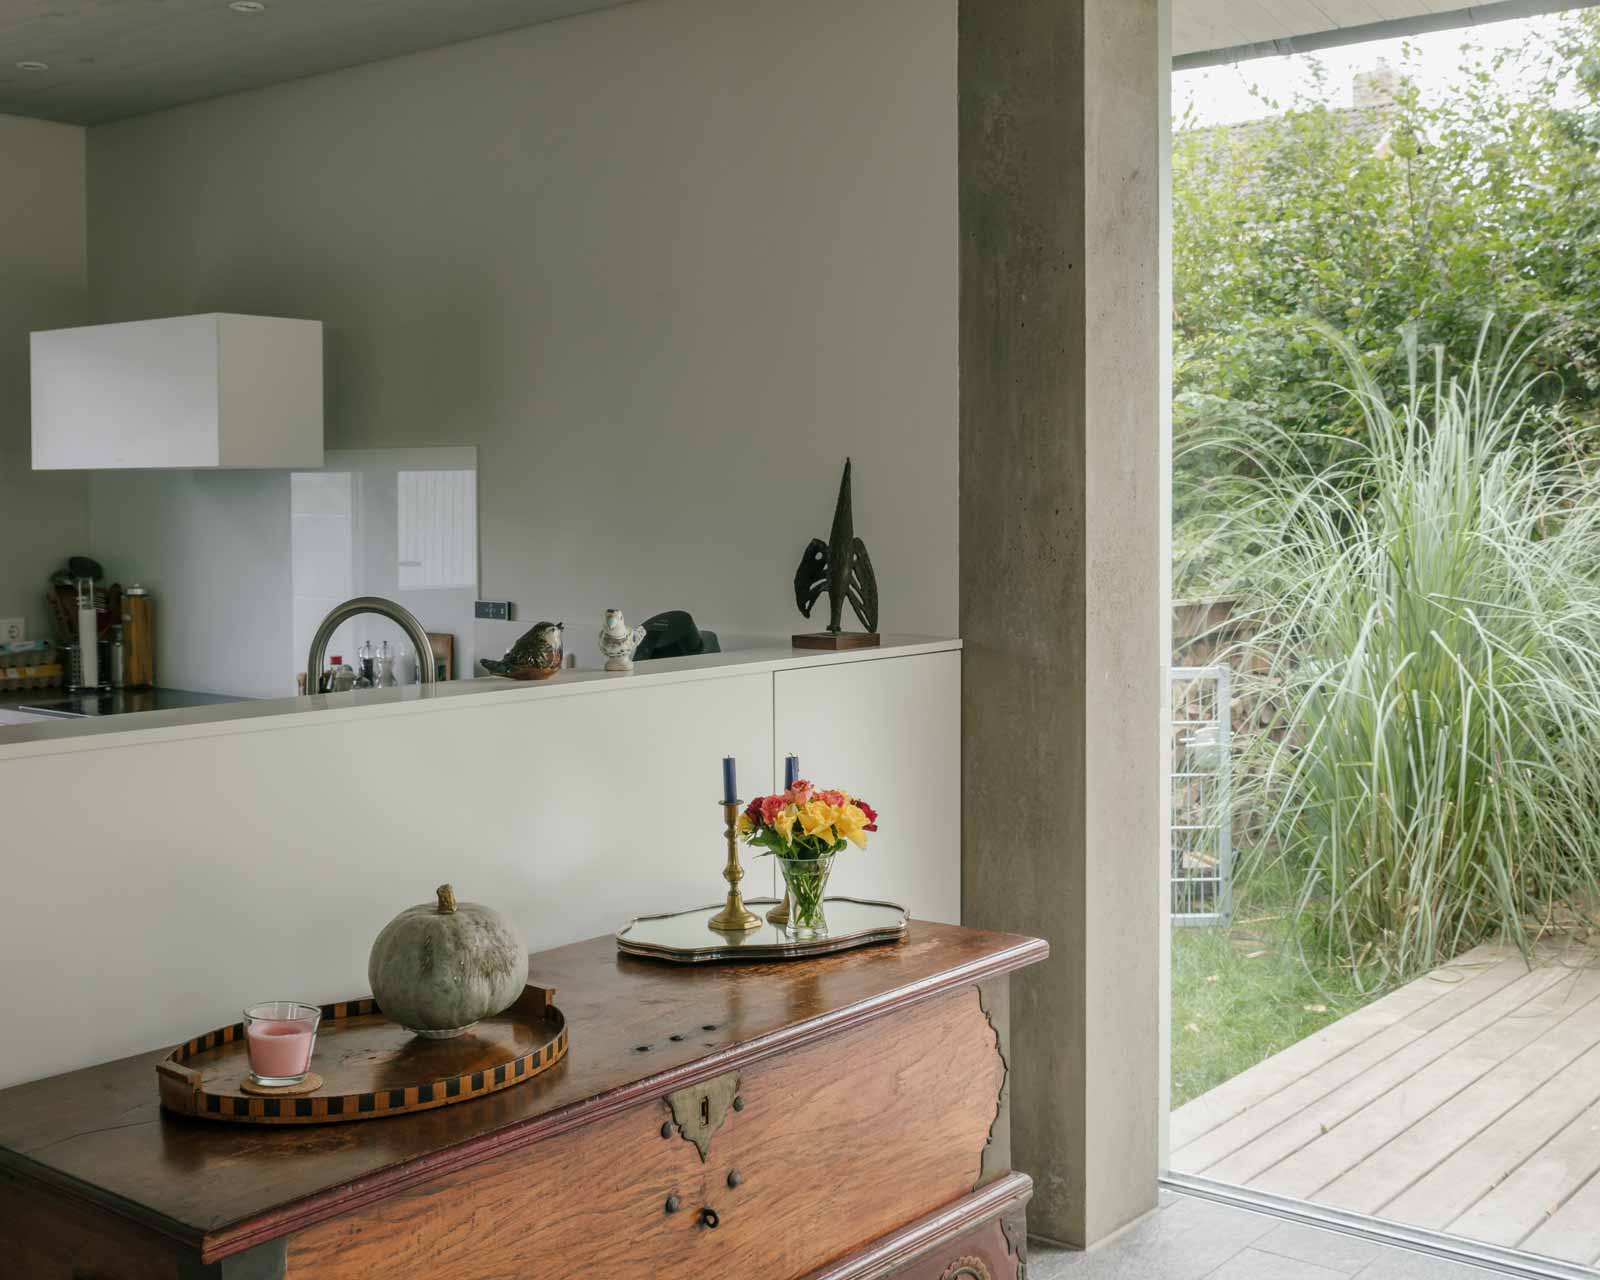 interior photo of house tc showing connection with the outdoors by beta architect amsterdam evert klinkenberg gus auguste van oppen image by Stijn Bollaert